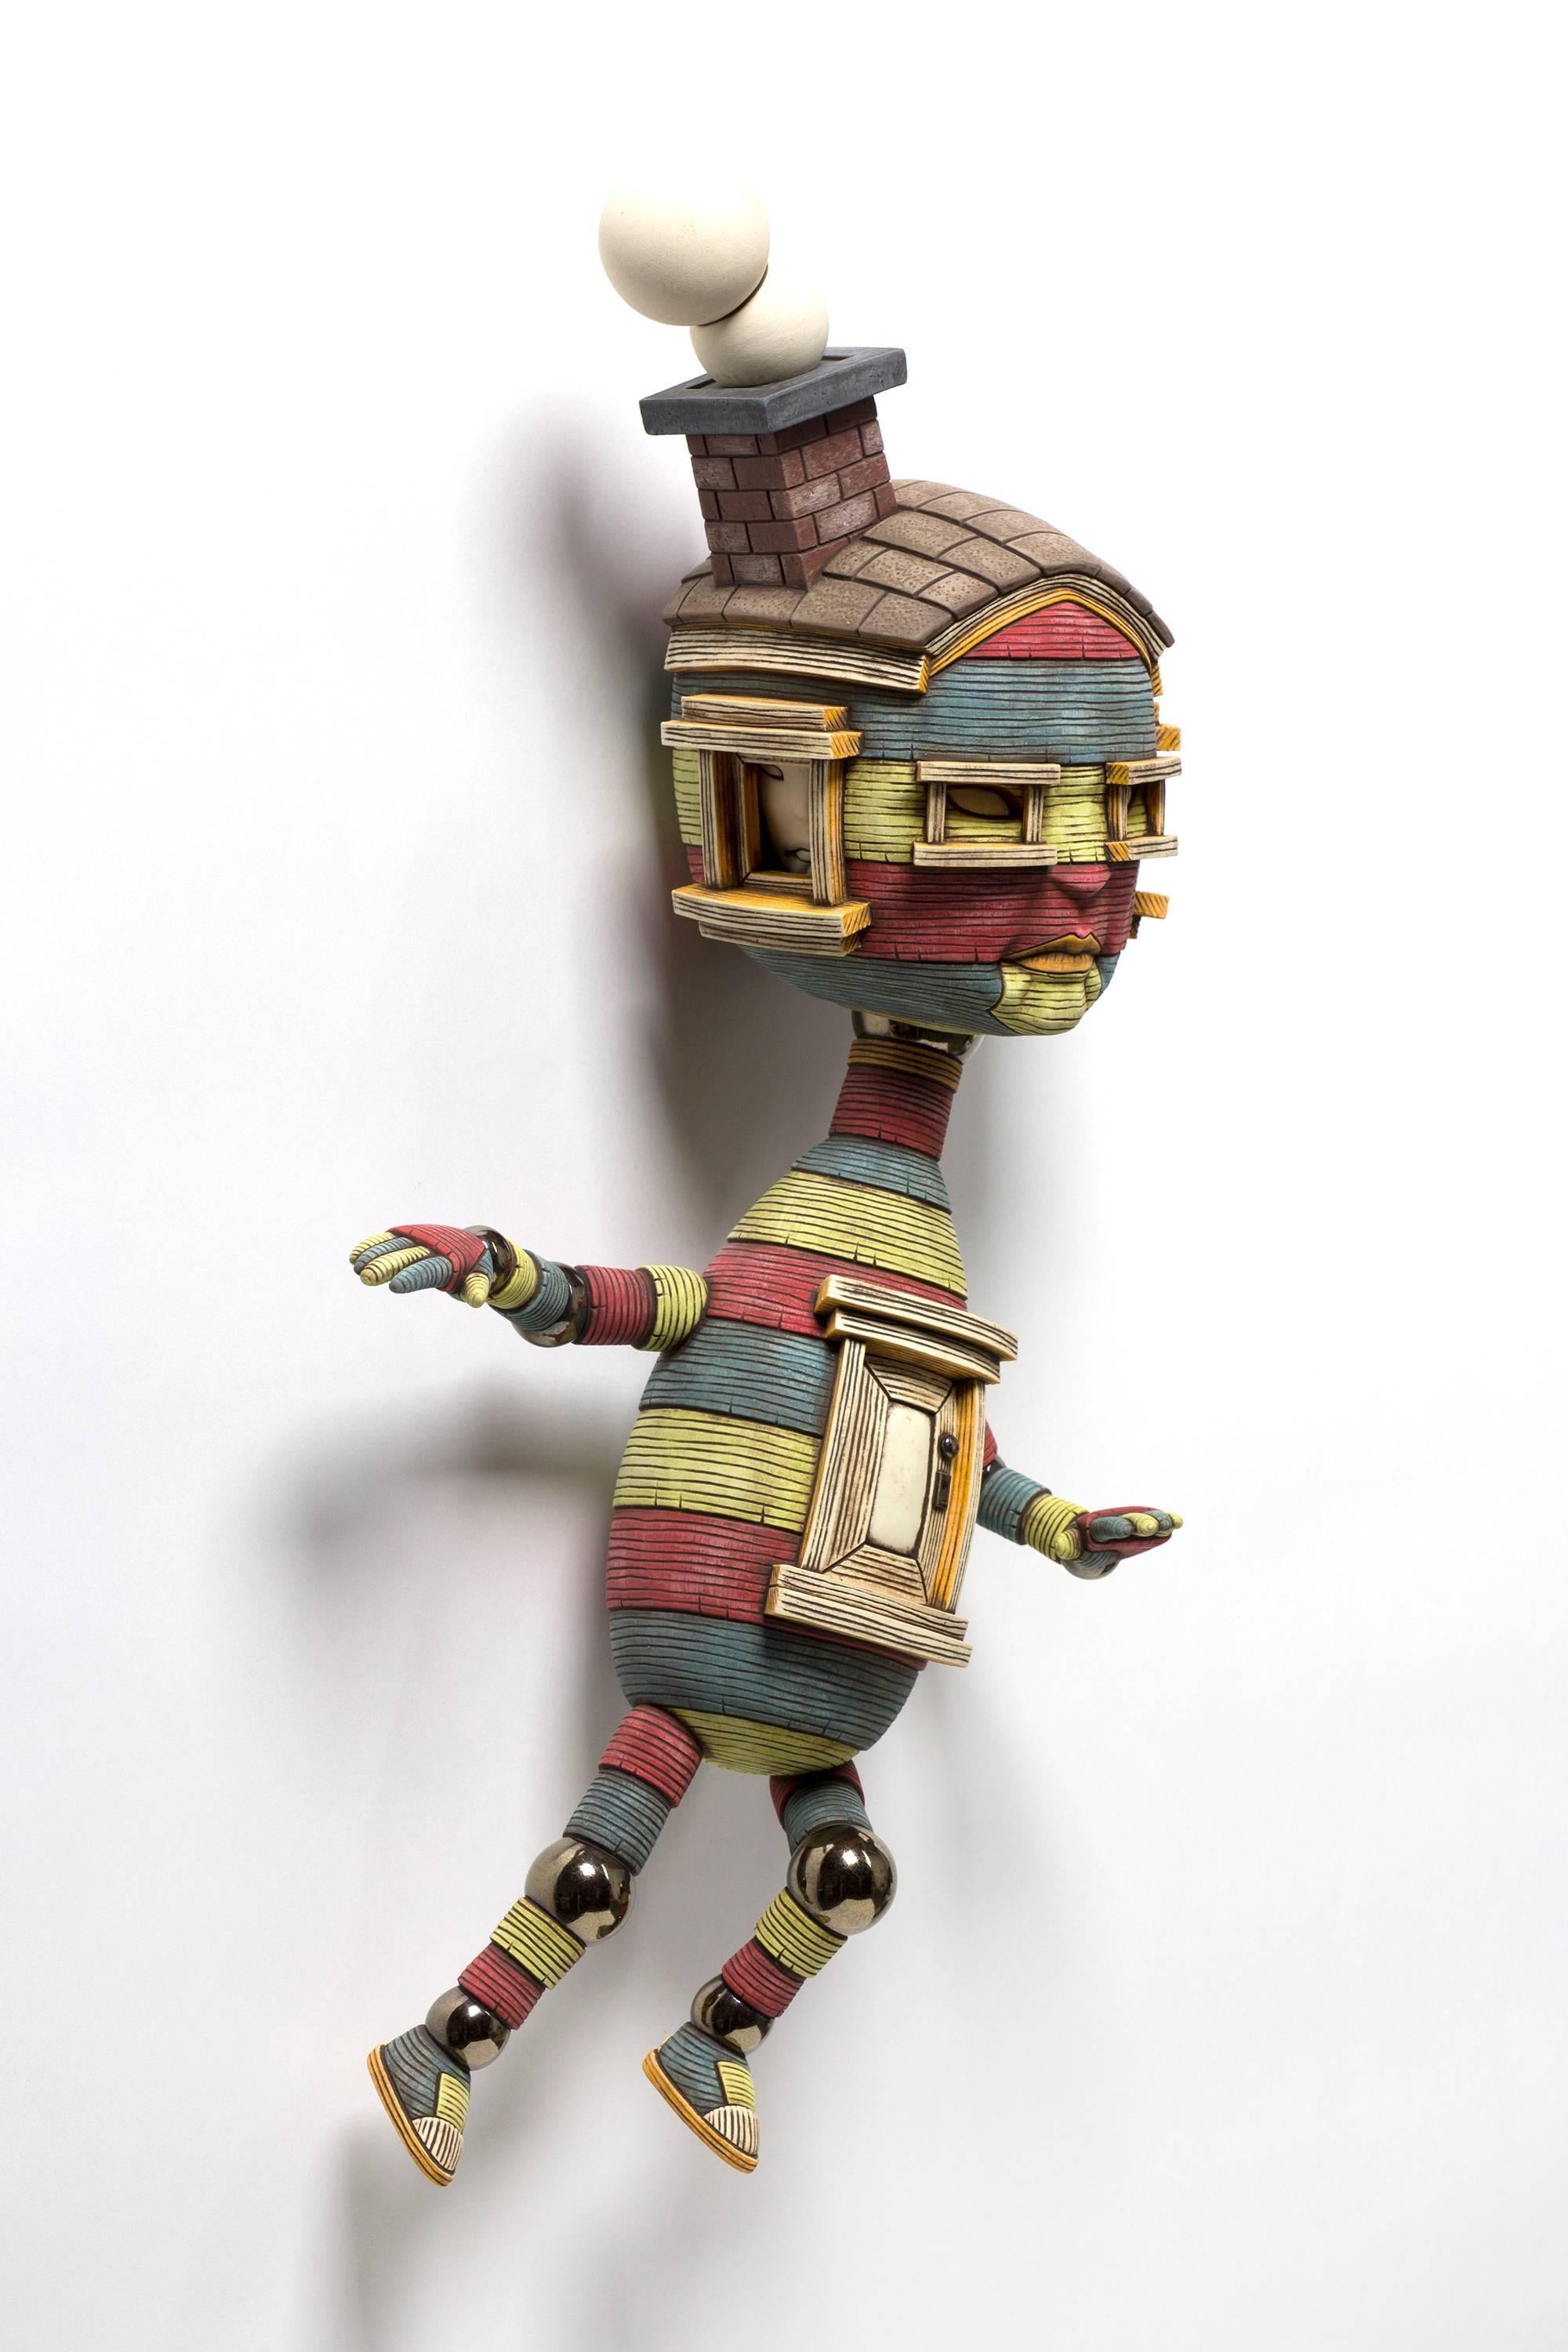 Calvin Ma is a ceramic sculptor born and raised in San Francisco, California. He received his BA in Industrial Arts from San Francisco State University and MFA in sculpture from the Academy of Art University. His work has been exhibited in numerous